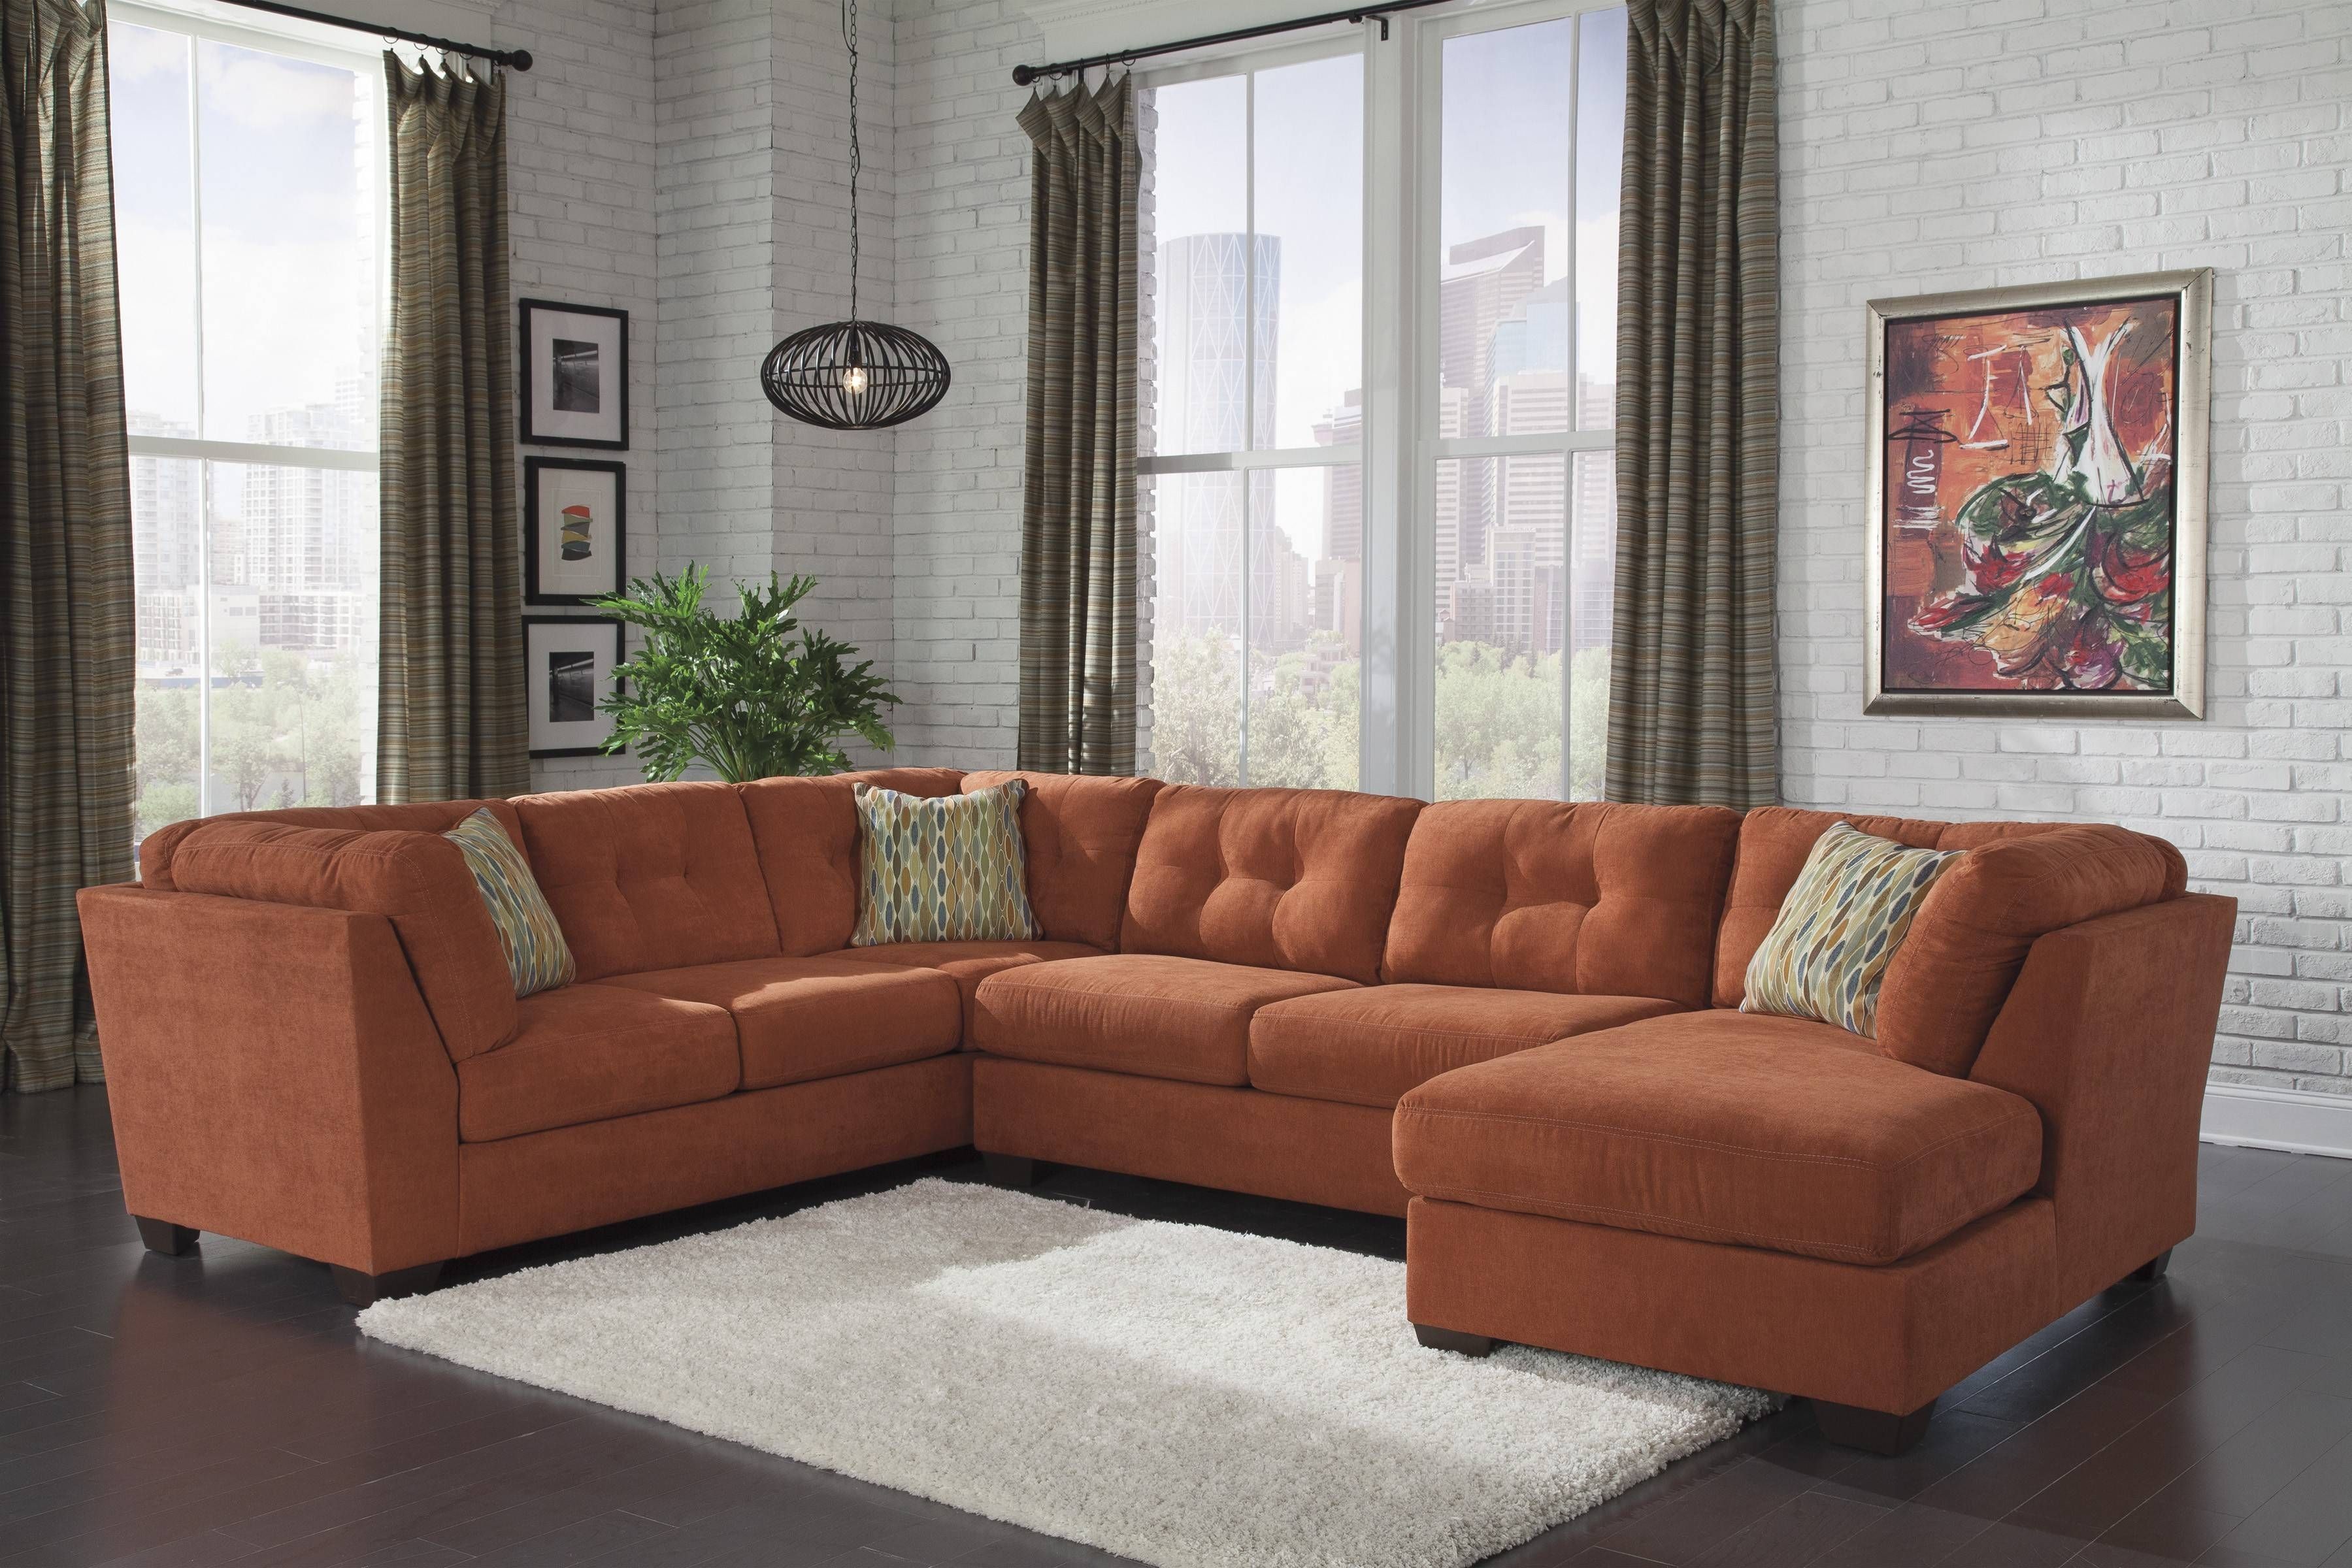 Furniture: Lazboy Furniture | Lazy Boy Sectional | Sectional Couch Inside Lazyboy Sectional Sofa (View 18 of 25)